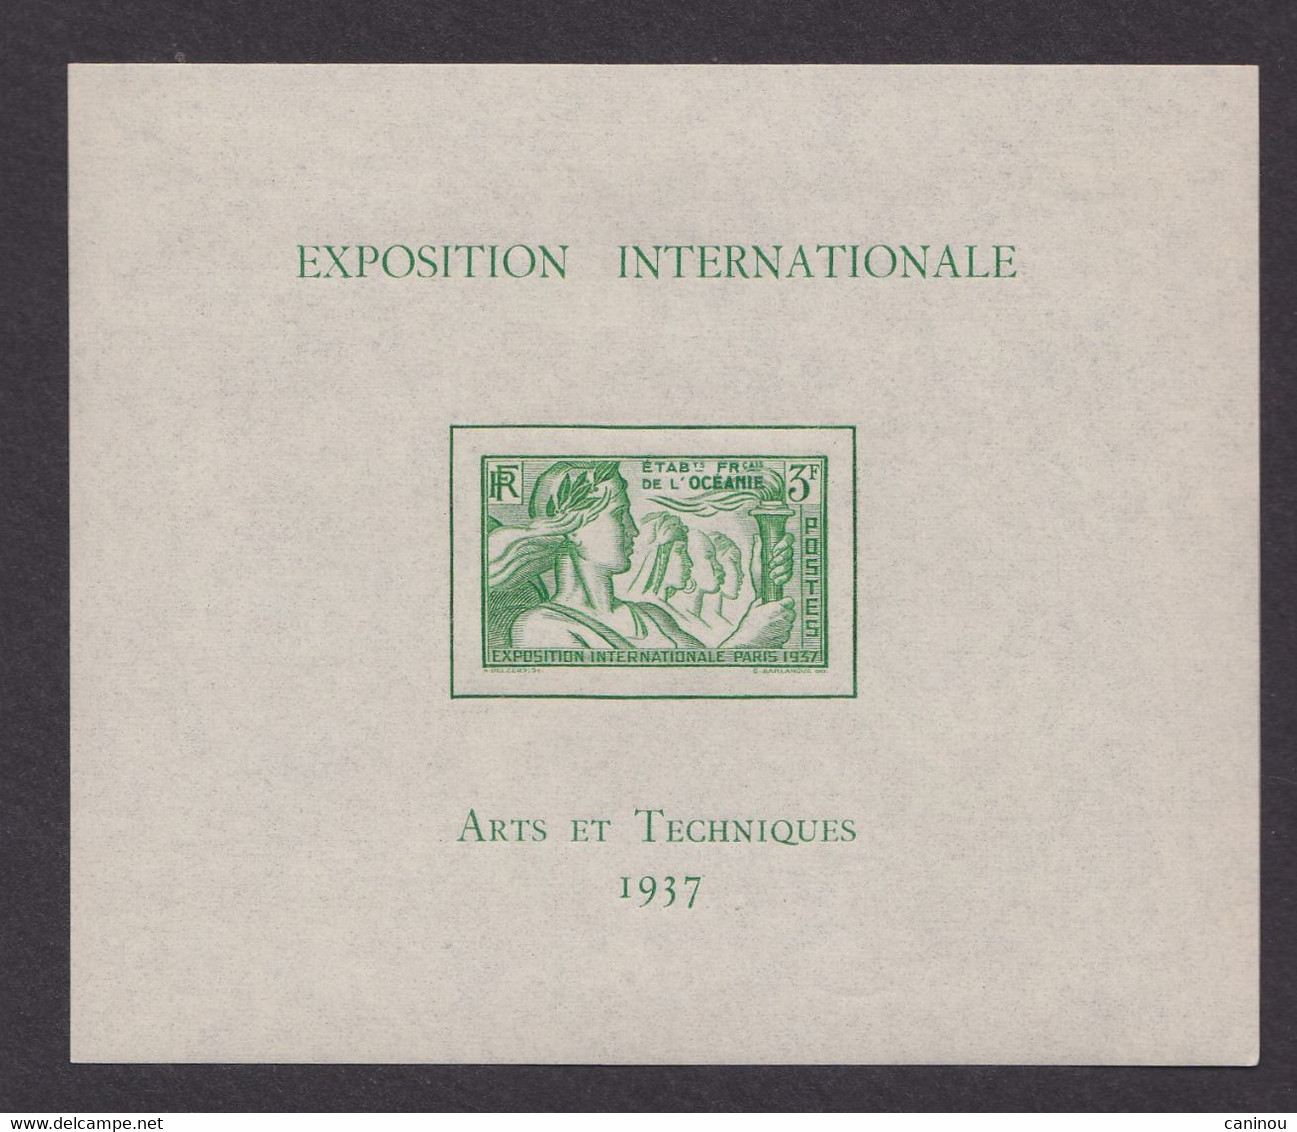 OCEANIE BF 1 EXPOSITION INTERNATIONALE 1937 NEUF TRACES DE CHARNIERES - Blocs-feuillets